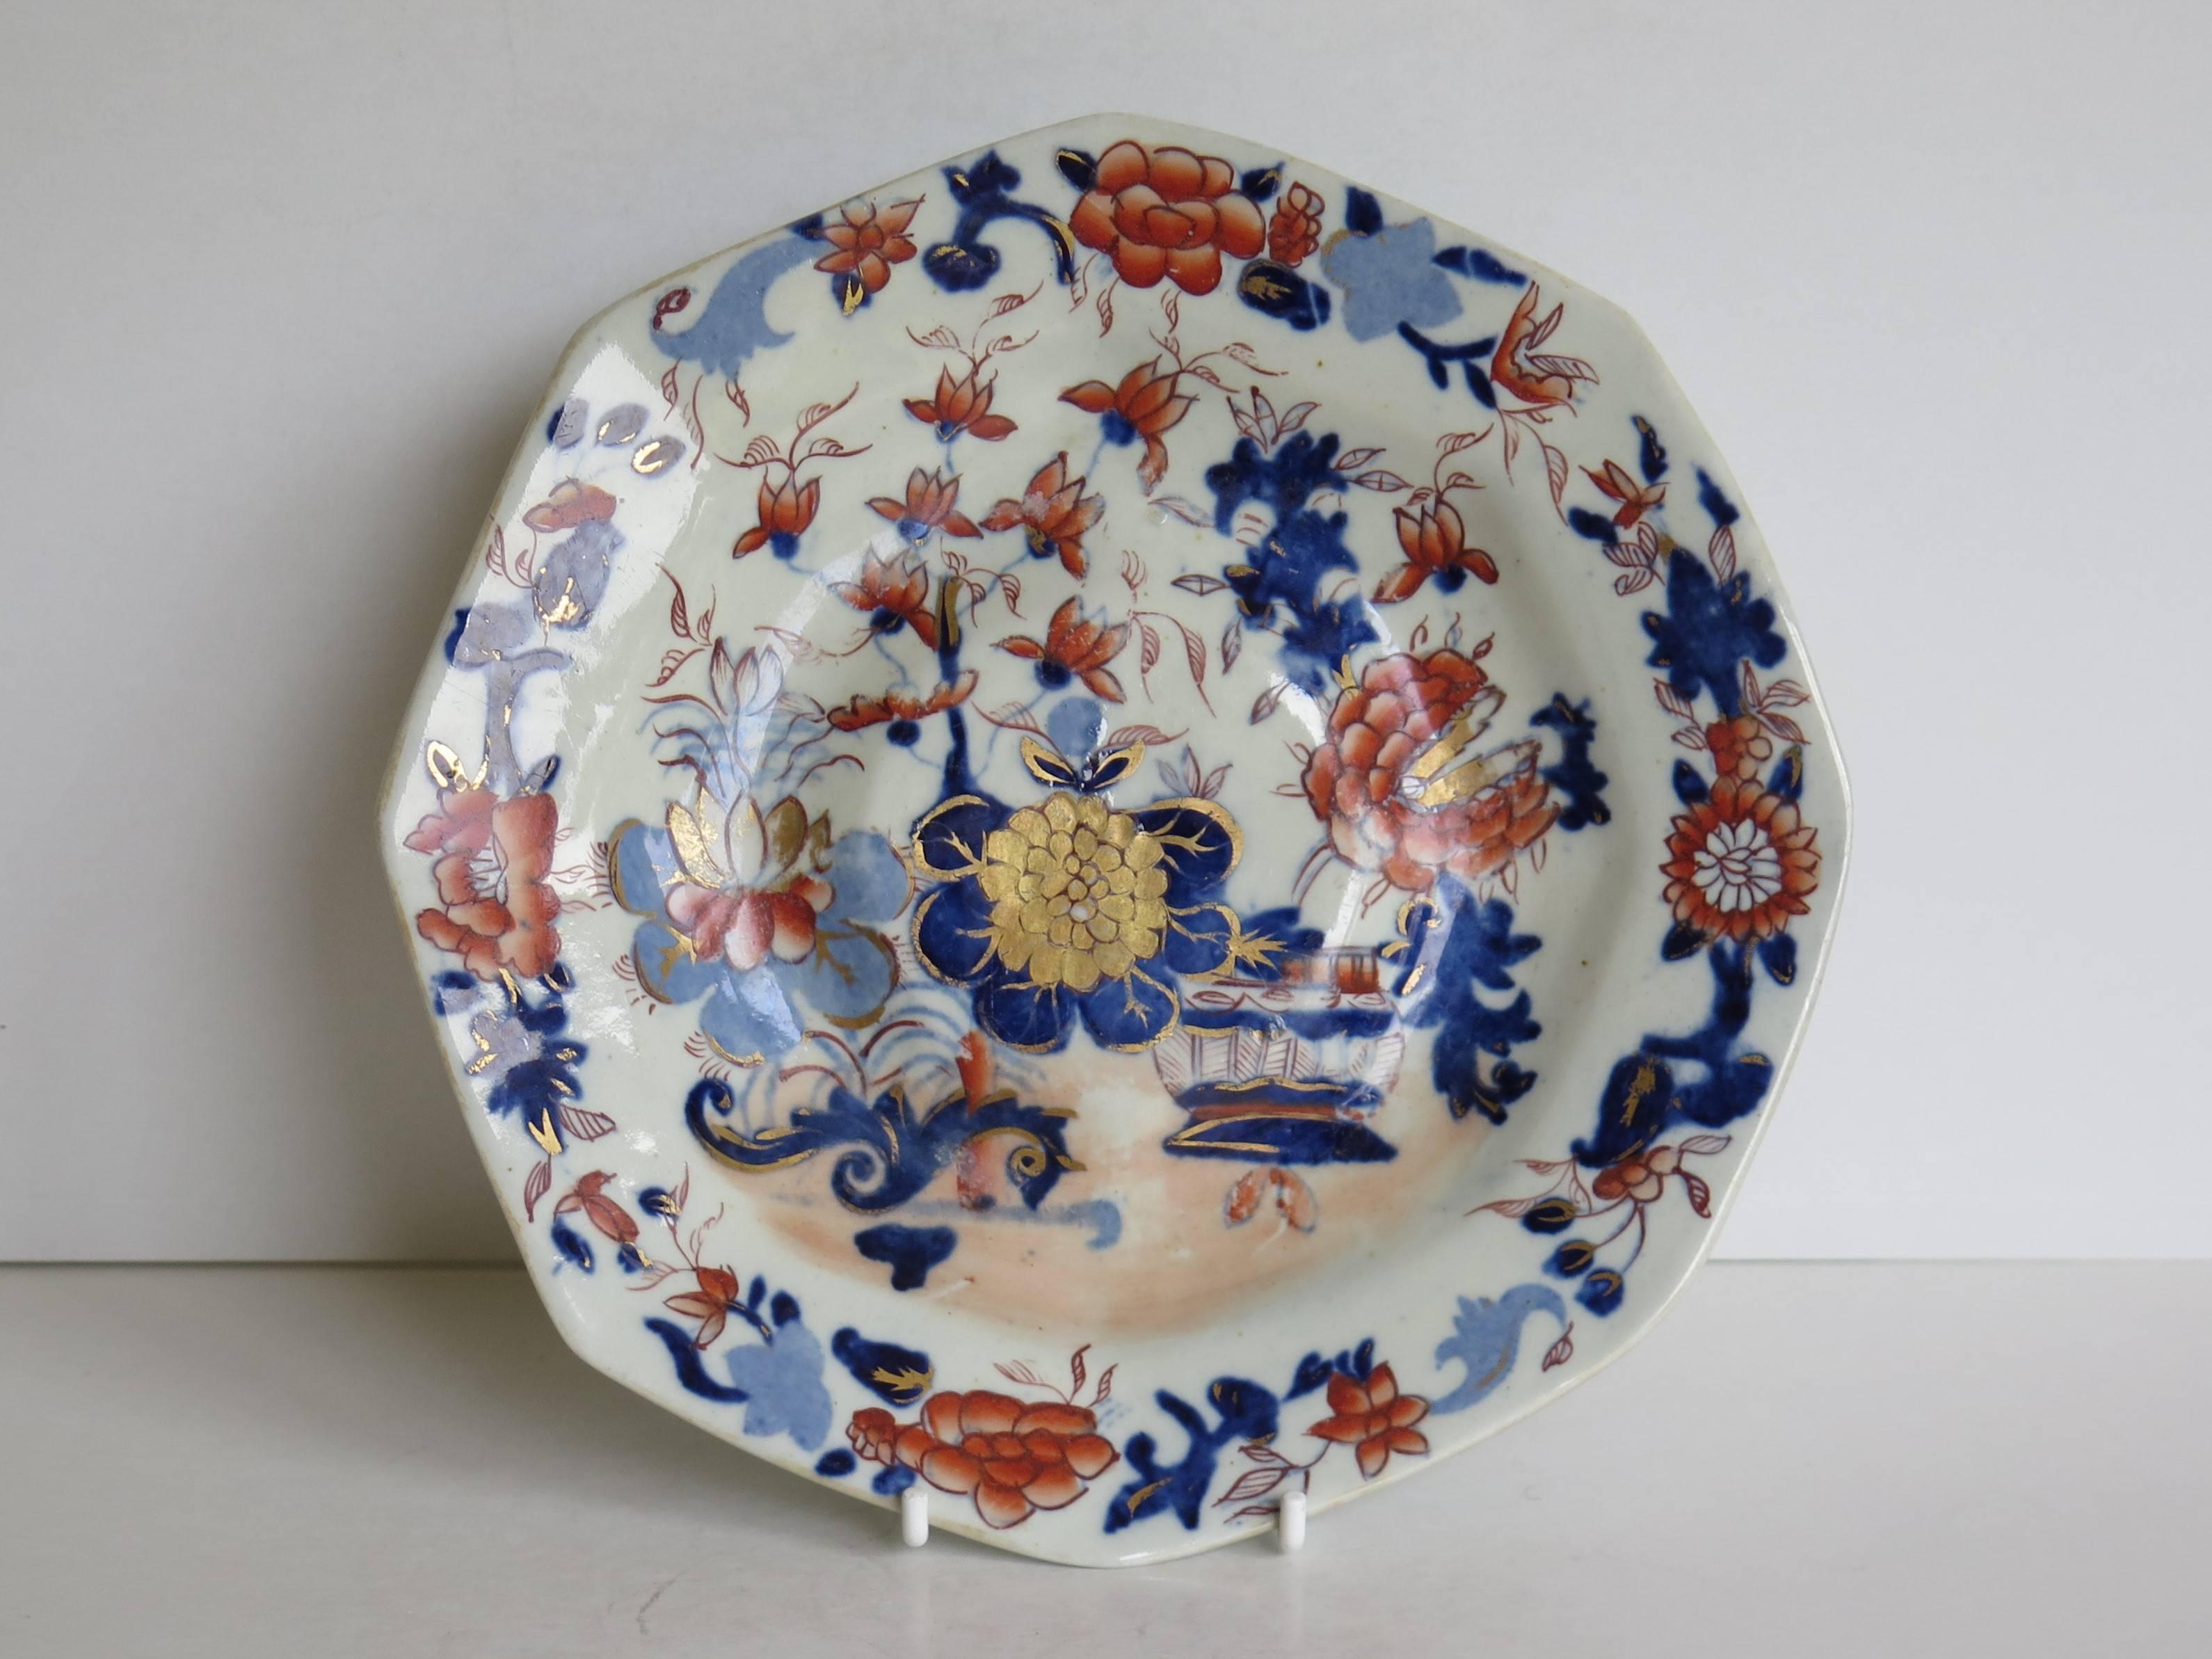 This is a very early octagonal footed plate, dish or stand in the Japan Basket Pattern by Mason's Ironstone, Lane Delph, England, dating to circa 1815.

The piece is octagonally potted on a raised foot with a slightly raised central